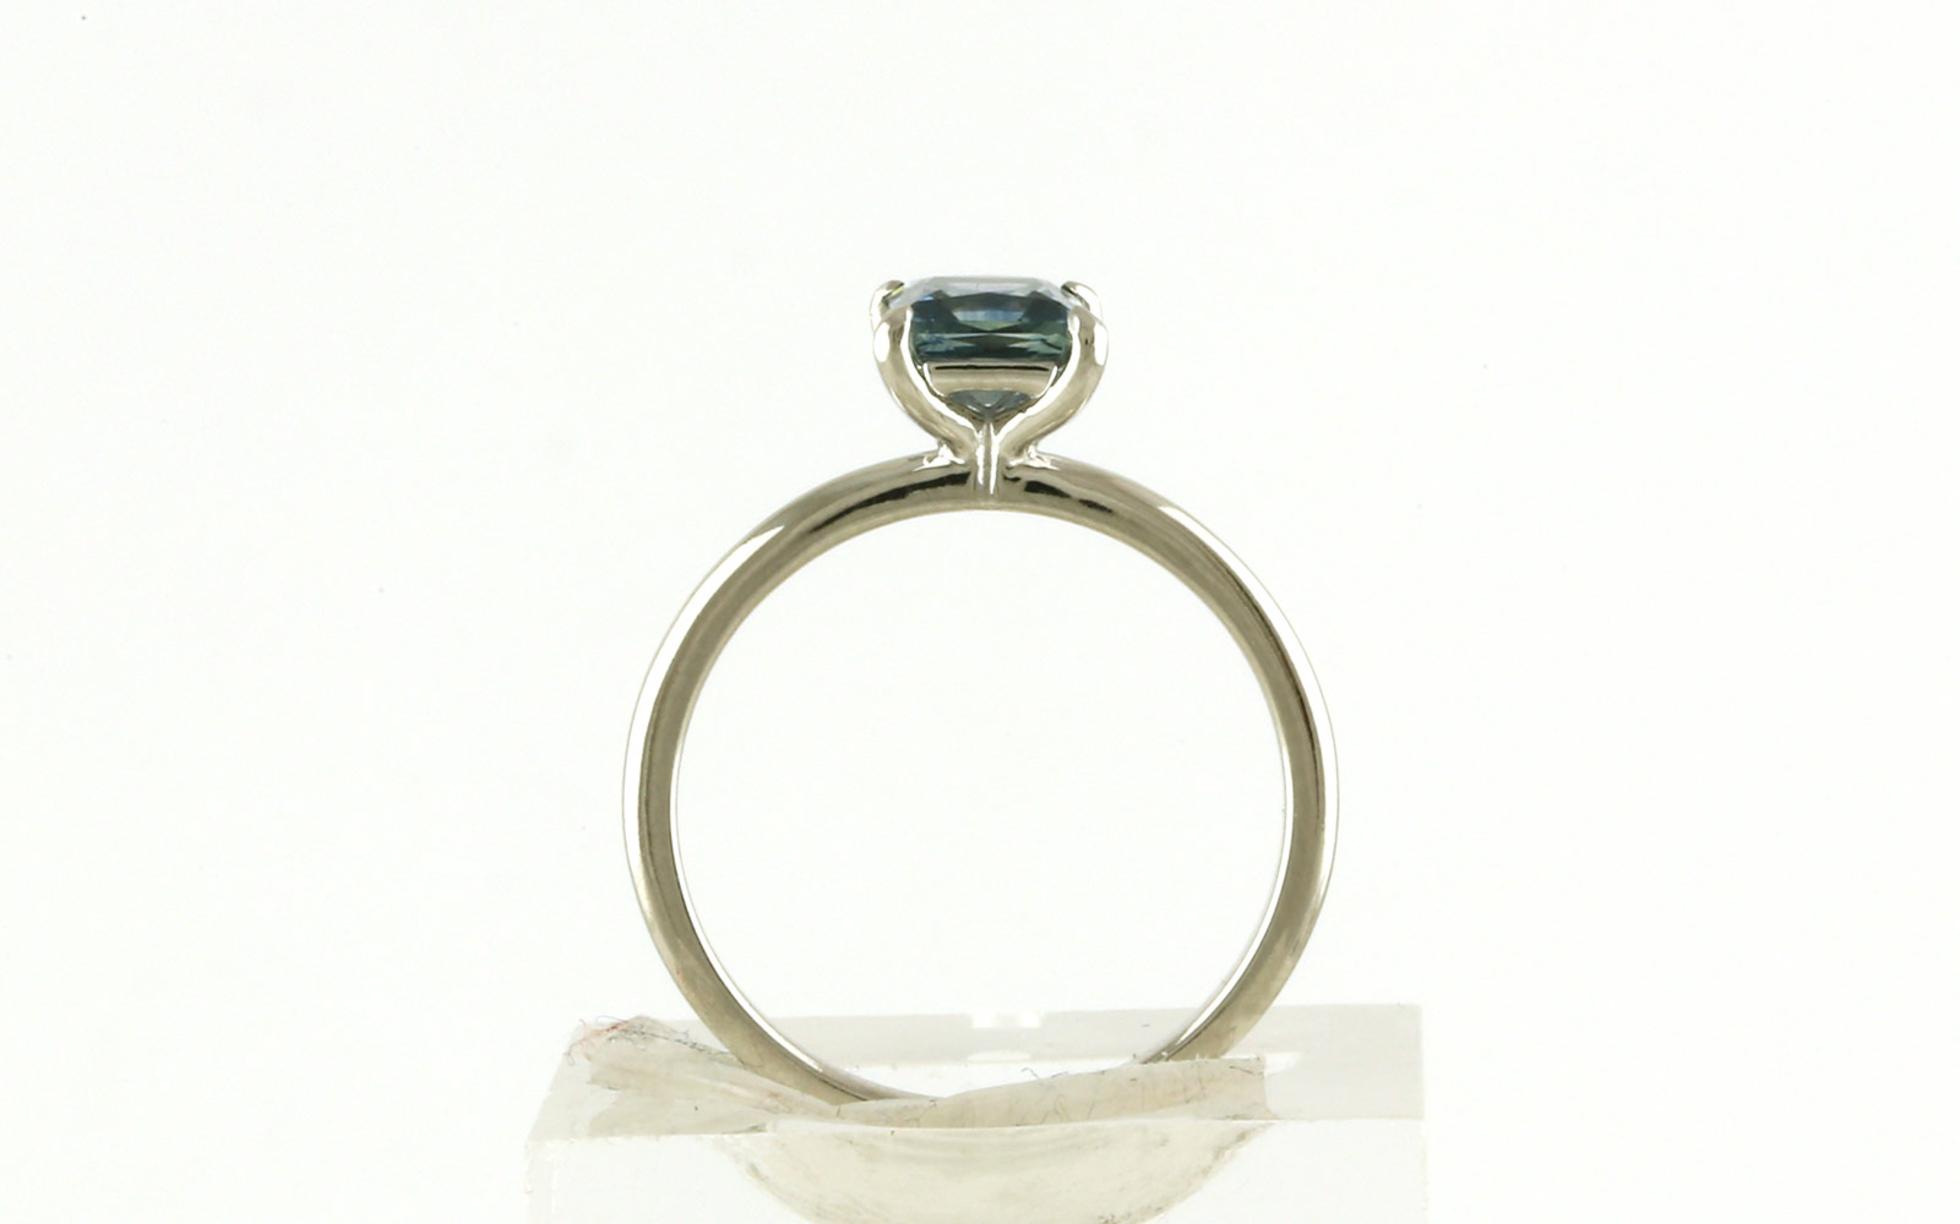 Solitaire-style Princess-cut Montana Sapphire Ring in White Gold (0.97cts)